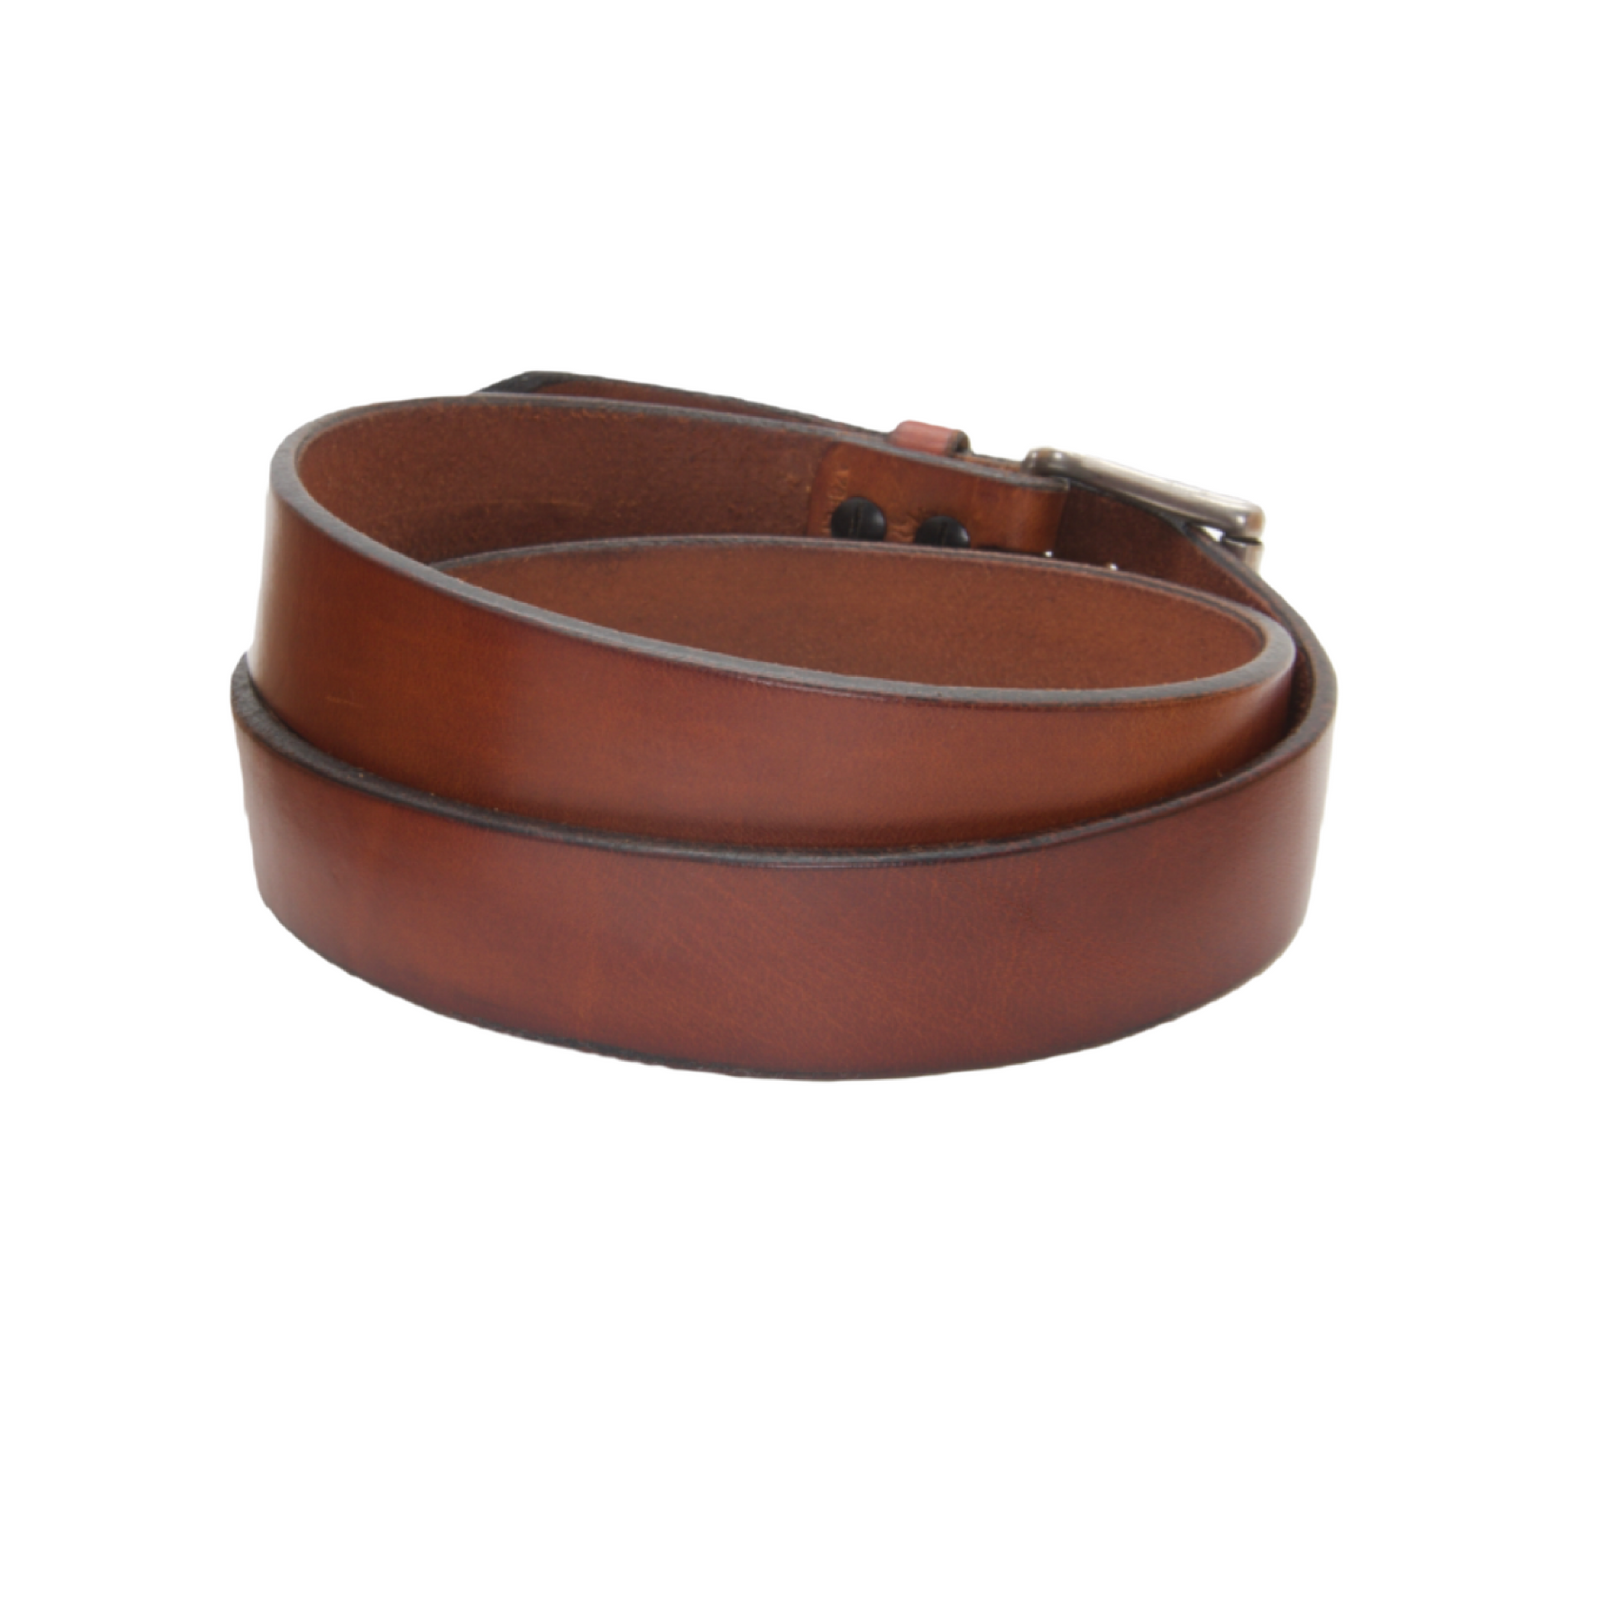 Thick Leather Belt - USA Made, Tan, 1.5 inch Wide, Durable Full Grain Leather, Custom Sized, Handmade by Mr. Lentz